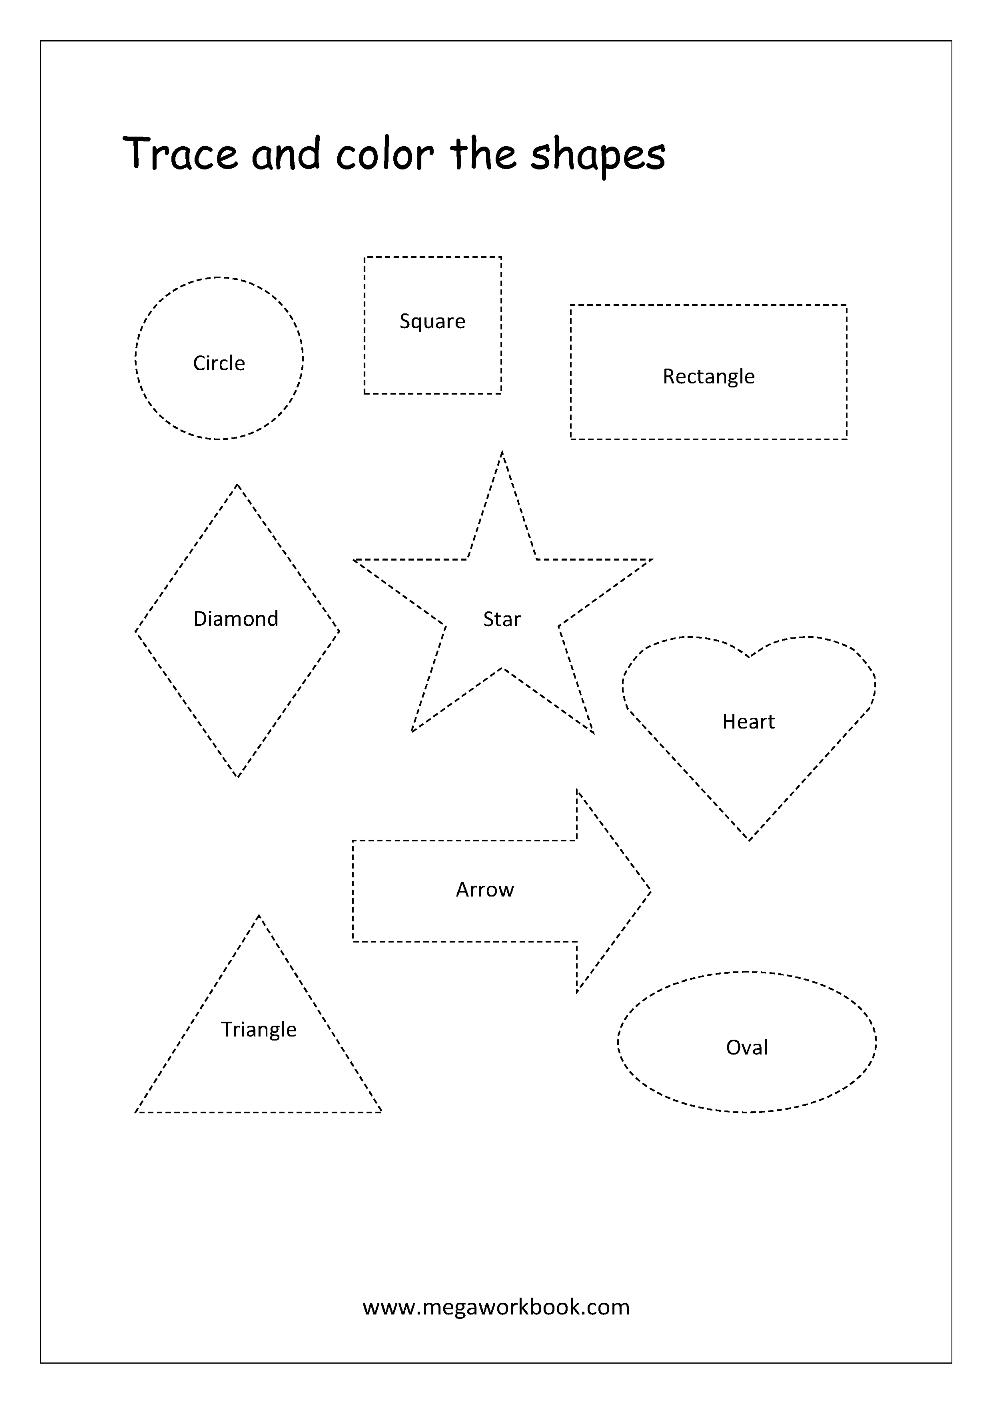 Free Printable Shapes Worksheets - Tracing Simple Shapes - Pre Writing